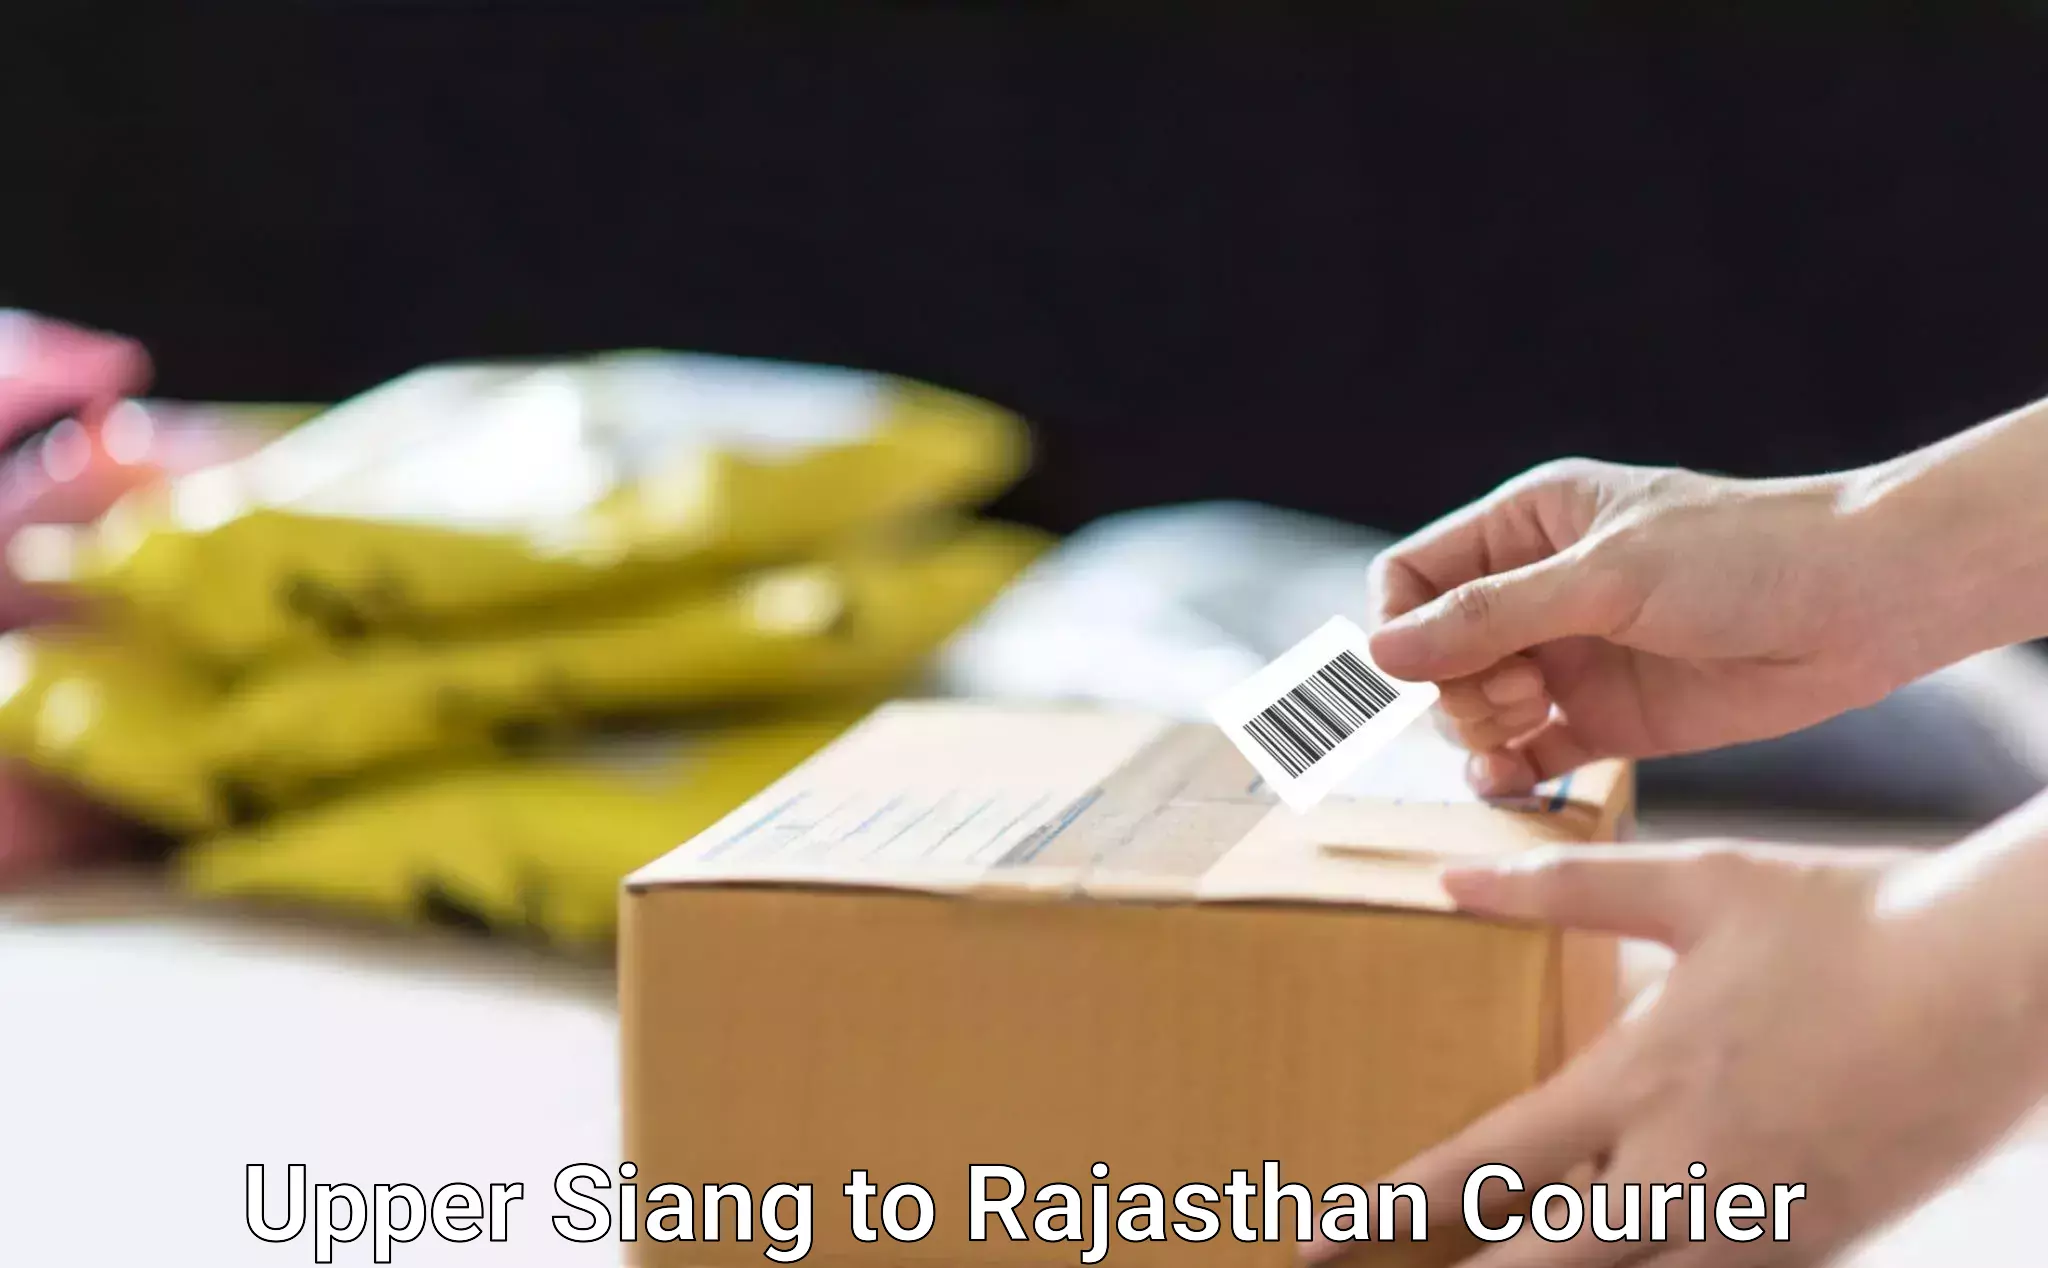 Lightweight parcel options Upper Siang to Dholpur